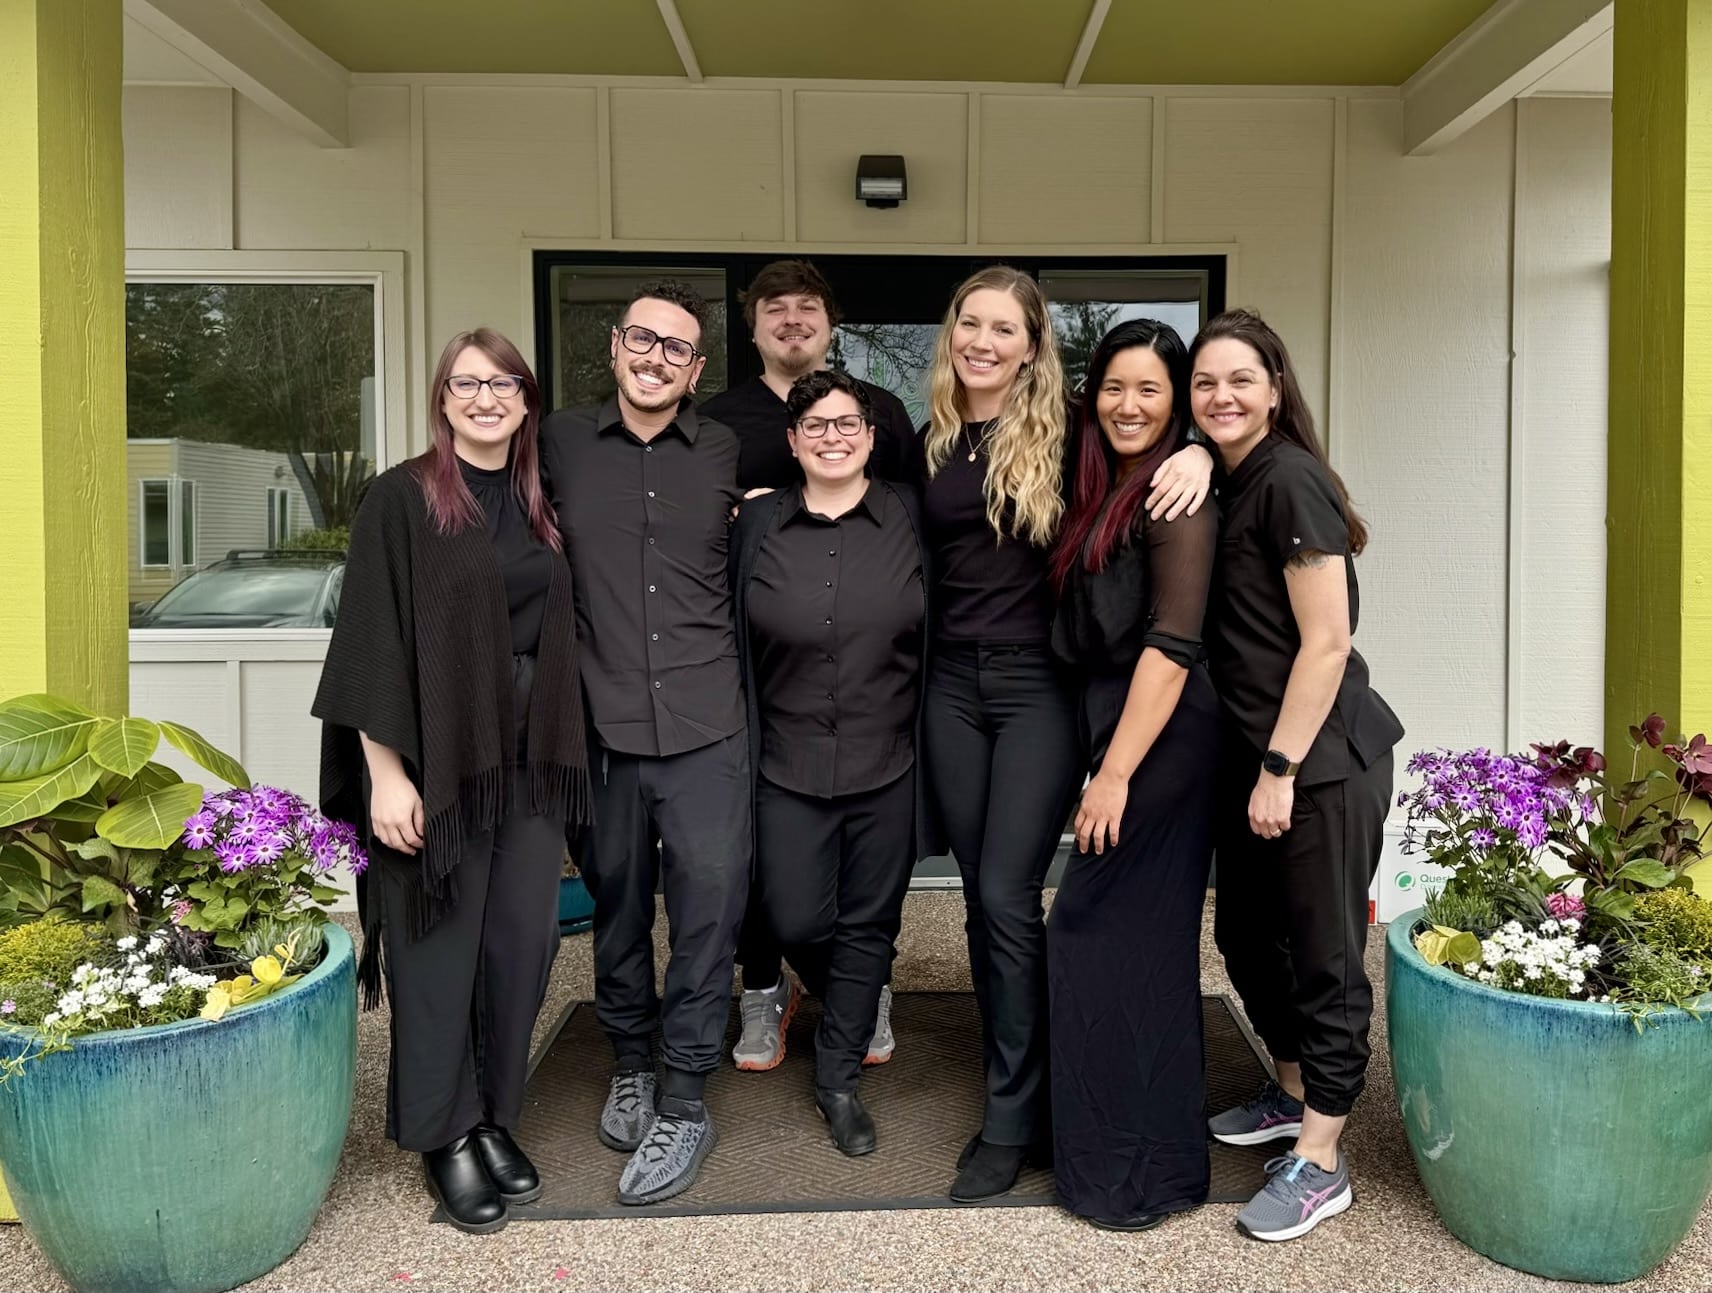 <br />
ChatGPT<br />
The image shows a group of seven people posing together in front of a light-colored house entrance, all dressed in stylish black attire. They are smiling broadly, displaying a warm, friendly demeanor. The group is diverse, consisting of three men and four women. Behind them are vibrant flower pots filled with purple and white flowers, adding a lively touch to the setting. The yellow-painted house door and greenery around the porch provide a pleasant, welcoming atmosphere.